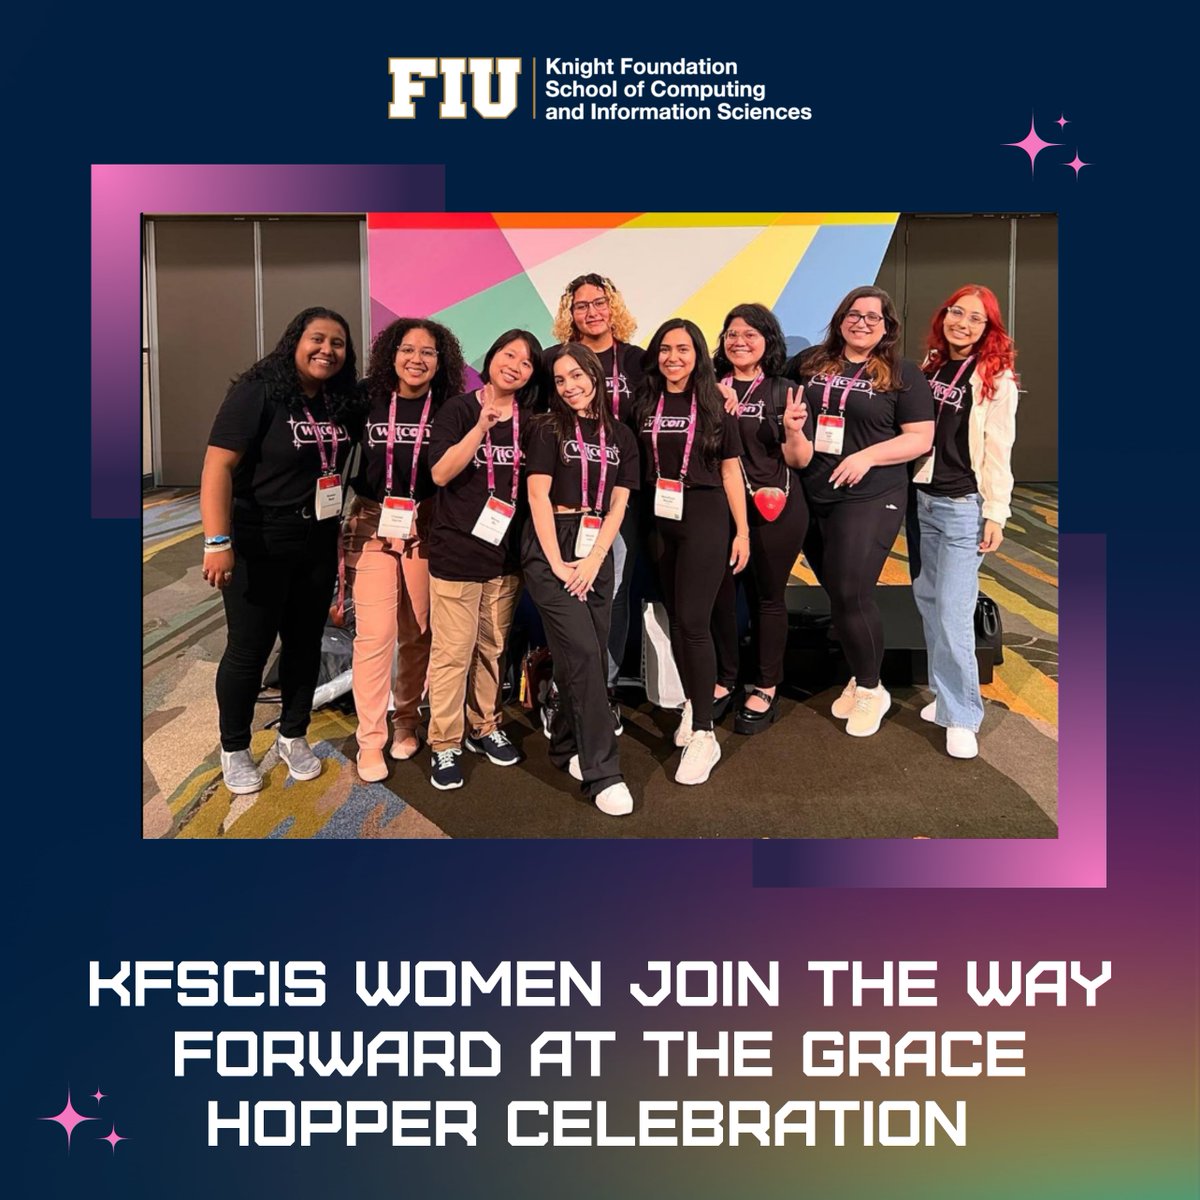 Our KFSCIS women, a strong cohort of 50, joined the Grace Hopper Celebration in Orlando, uniting with over 30,000 attendees under the theme 'The Way Forward.' This event championed inclusivity and equity in tech. #FIU #KFSCIS #FIUCEC #Stem #Technology #GHC2023 #WomenInTech